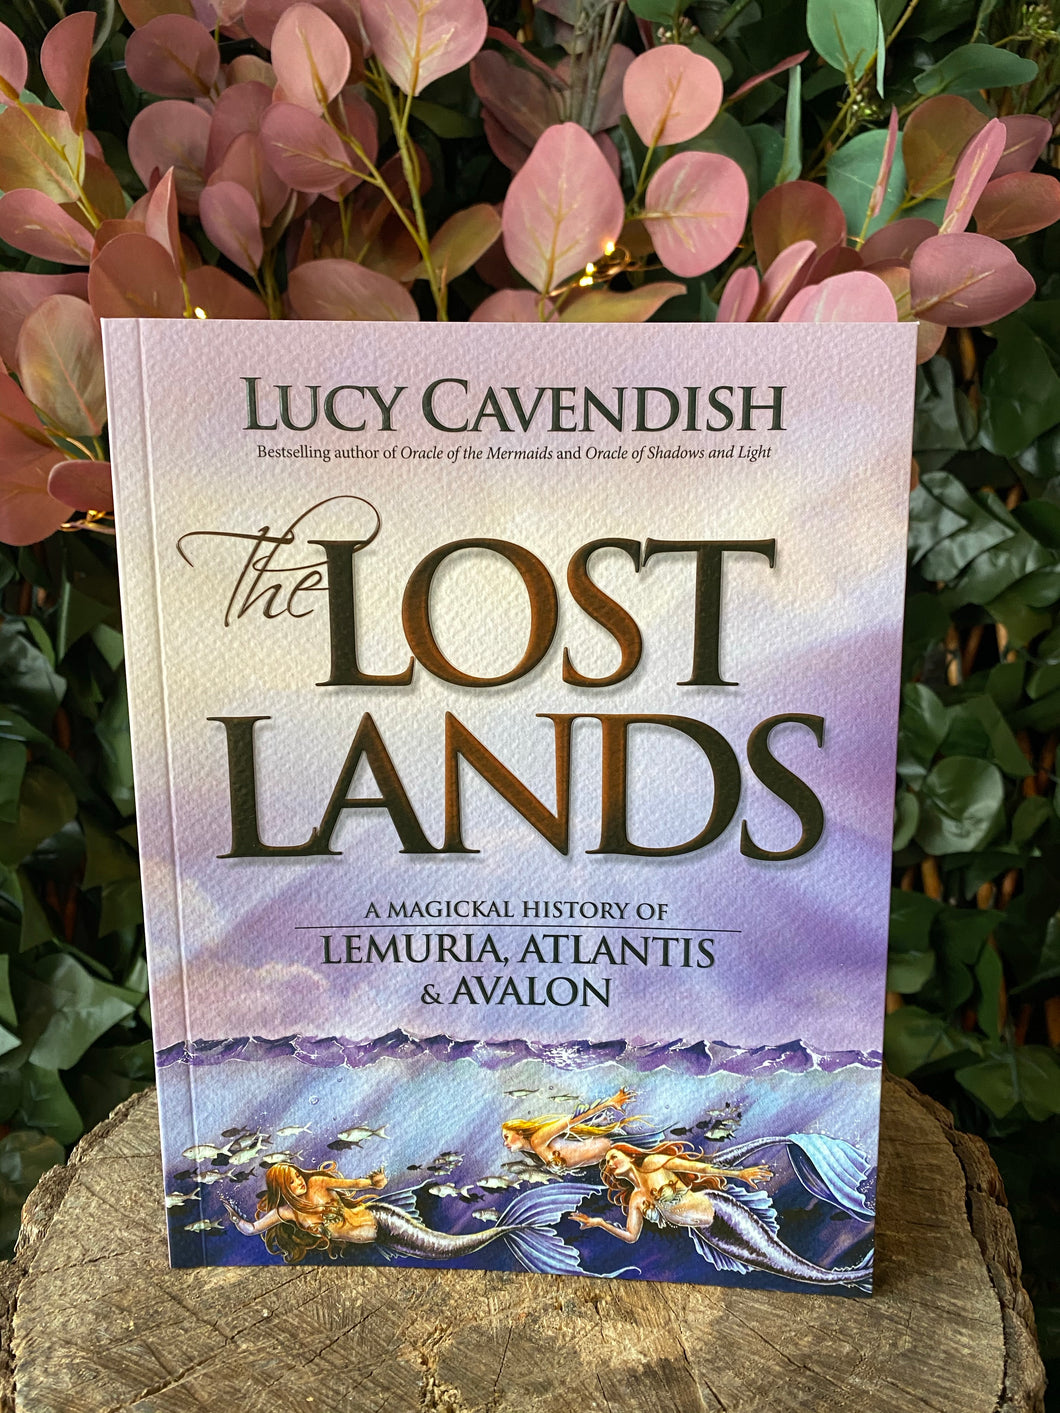 The Lost Lands - A magickal history of Lemuria, Atlantis and Avalon